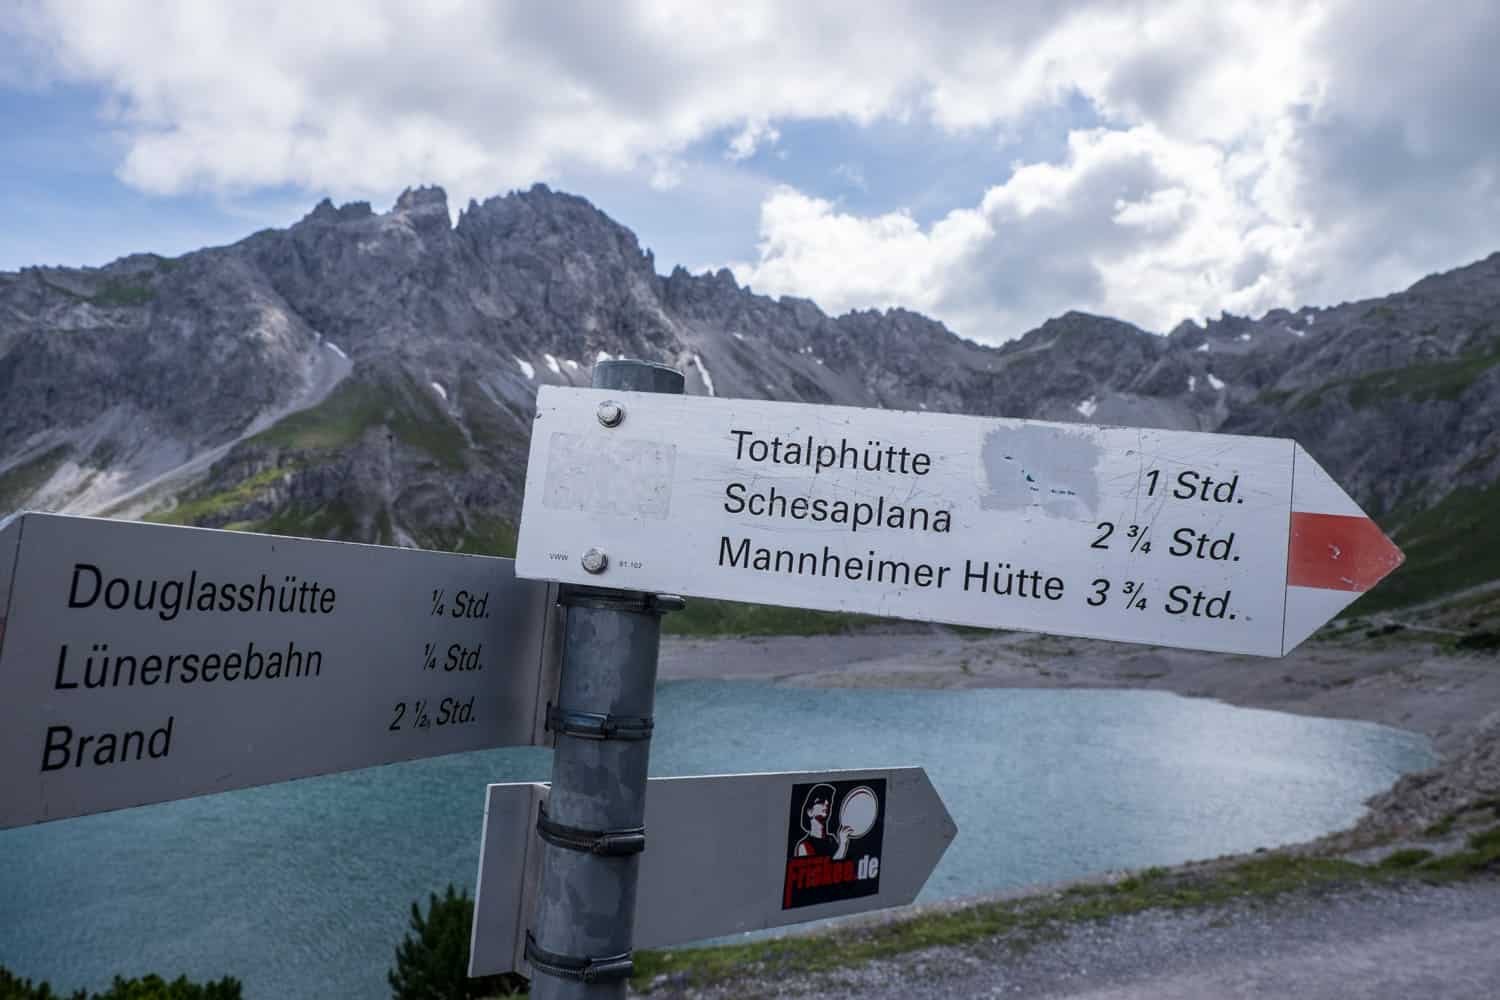 Signs for hiking oaths and huts a Lake Lunersee in Vorarlberg, Austria